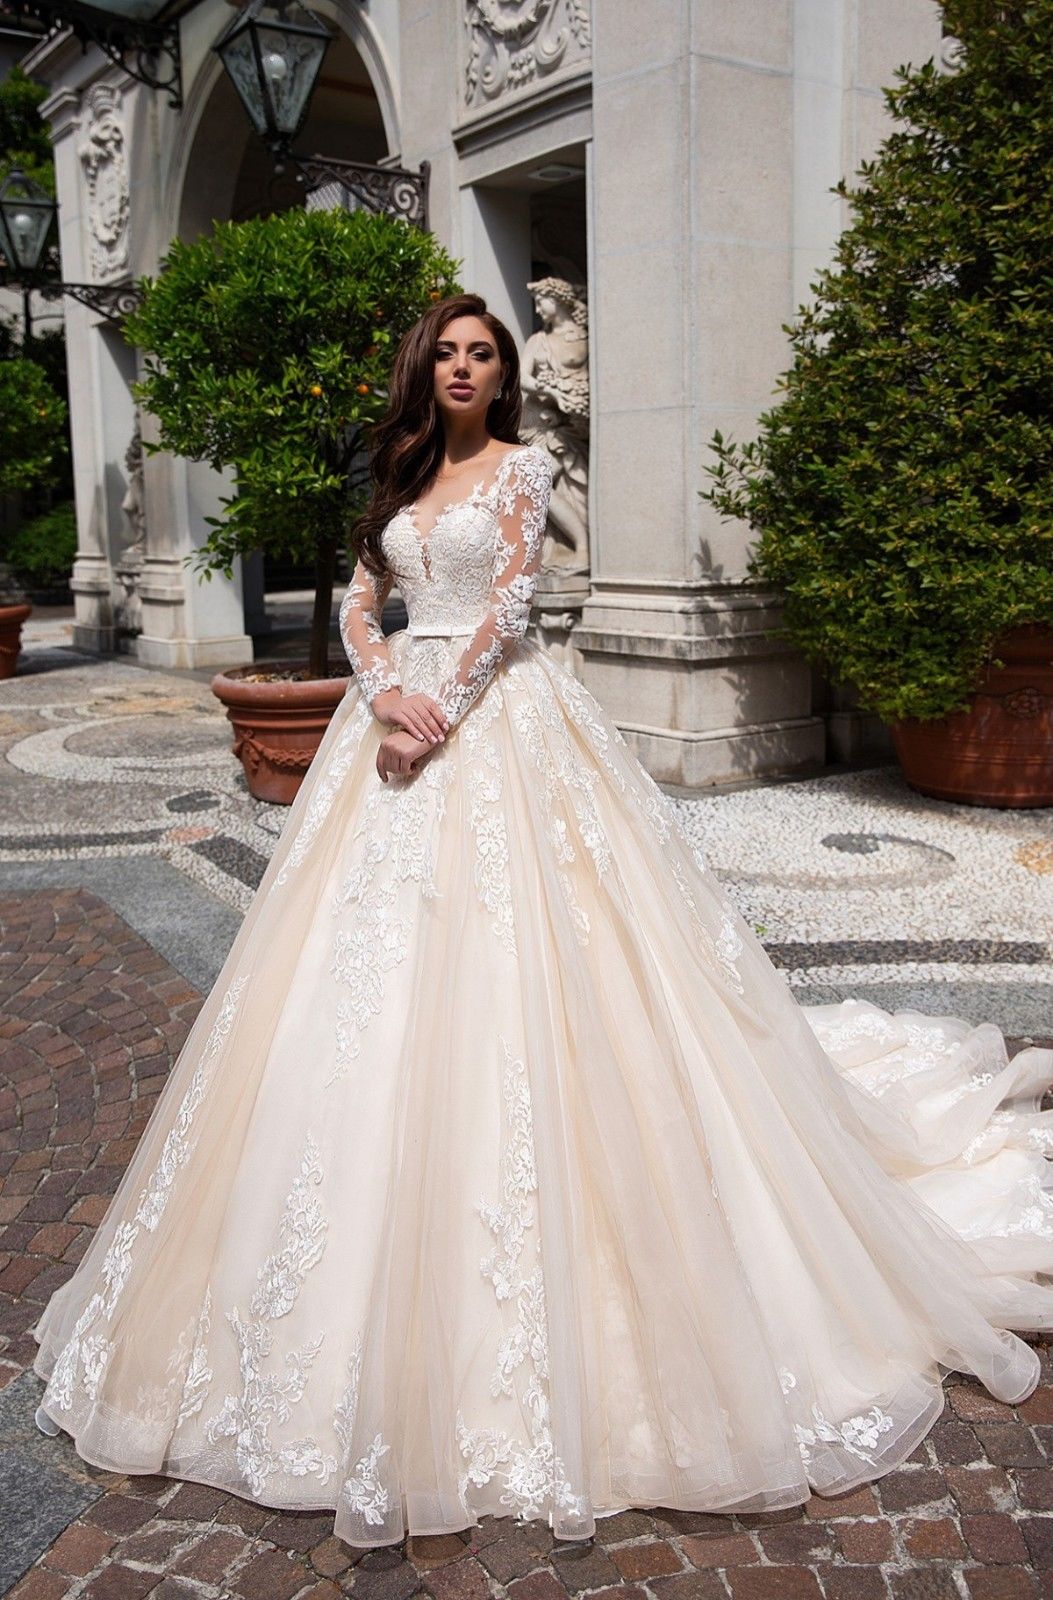 Lace Ball Gown Long Sleeve Wedding Dresses Ivory Champagne ...